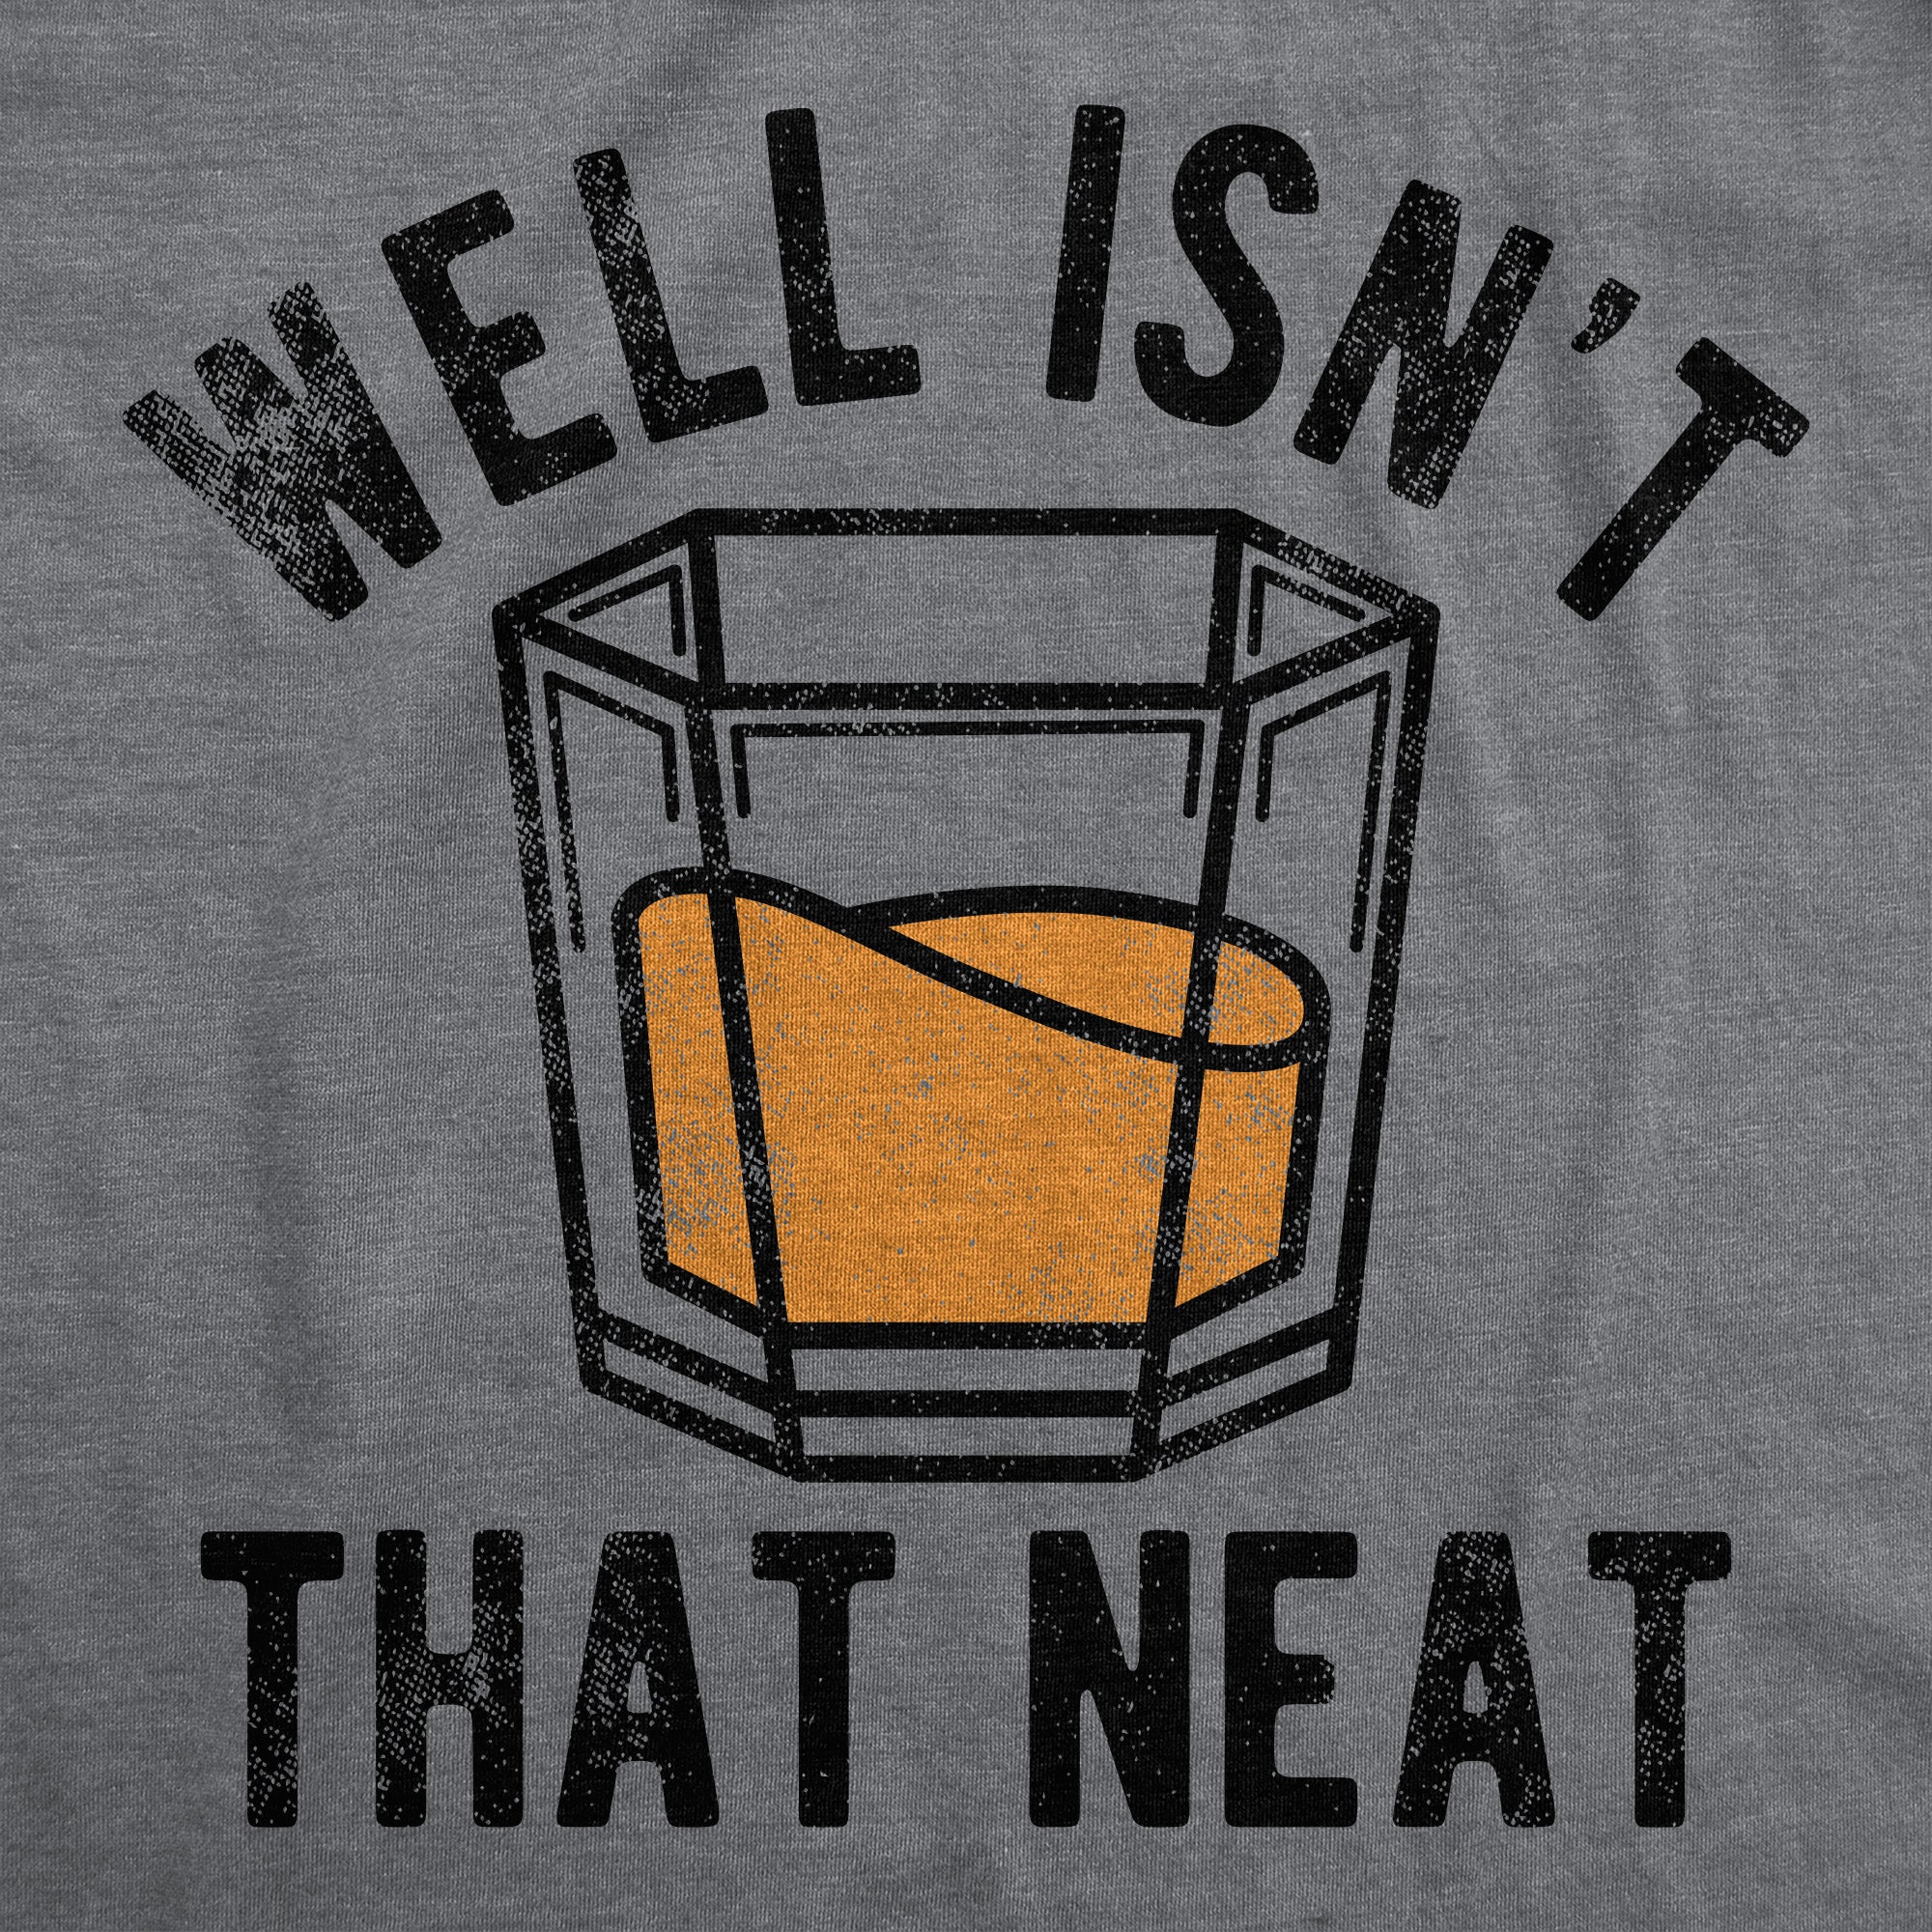 Funny Dark Heather Grey - Well Isnt That Neat Well Isnt That Neat Womens T Shirt Nerdy Liquor Drinking Tee